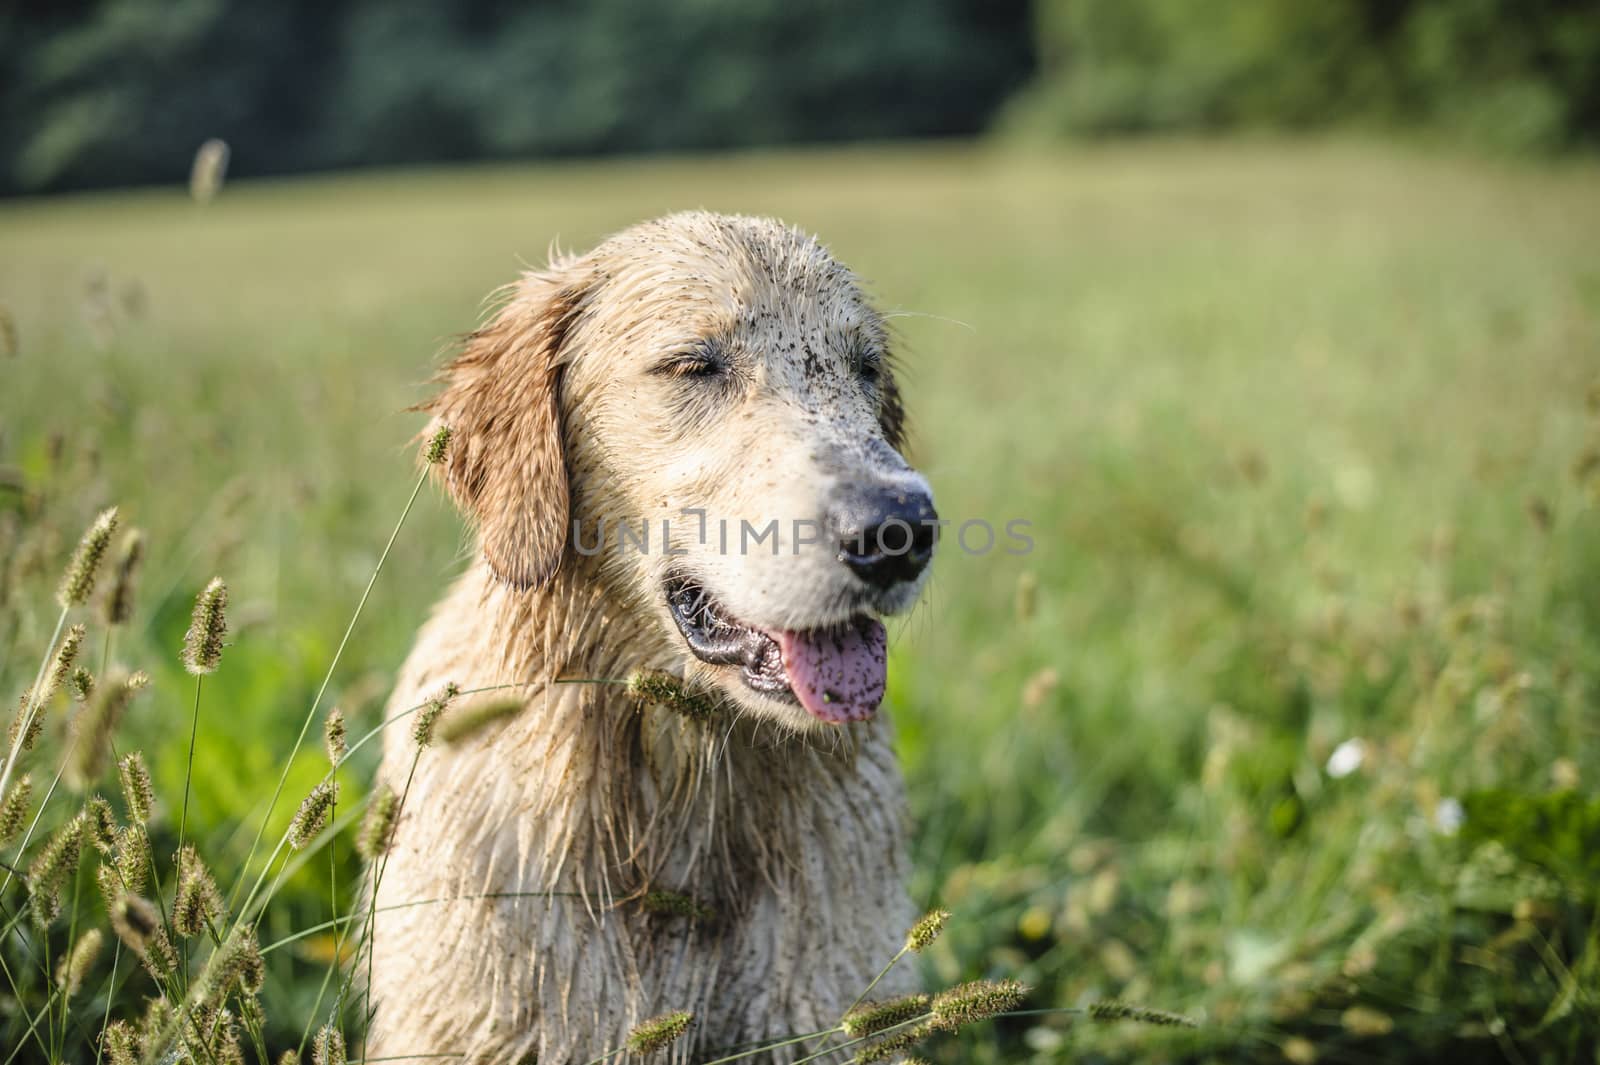 portrait of golden retriever in the tall grass on an autumn day